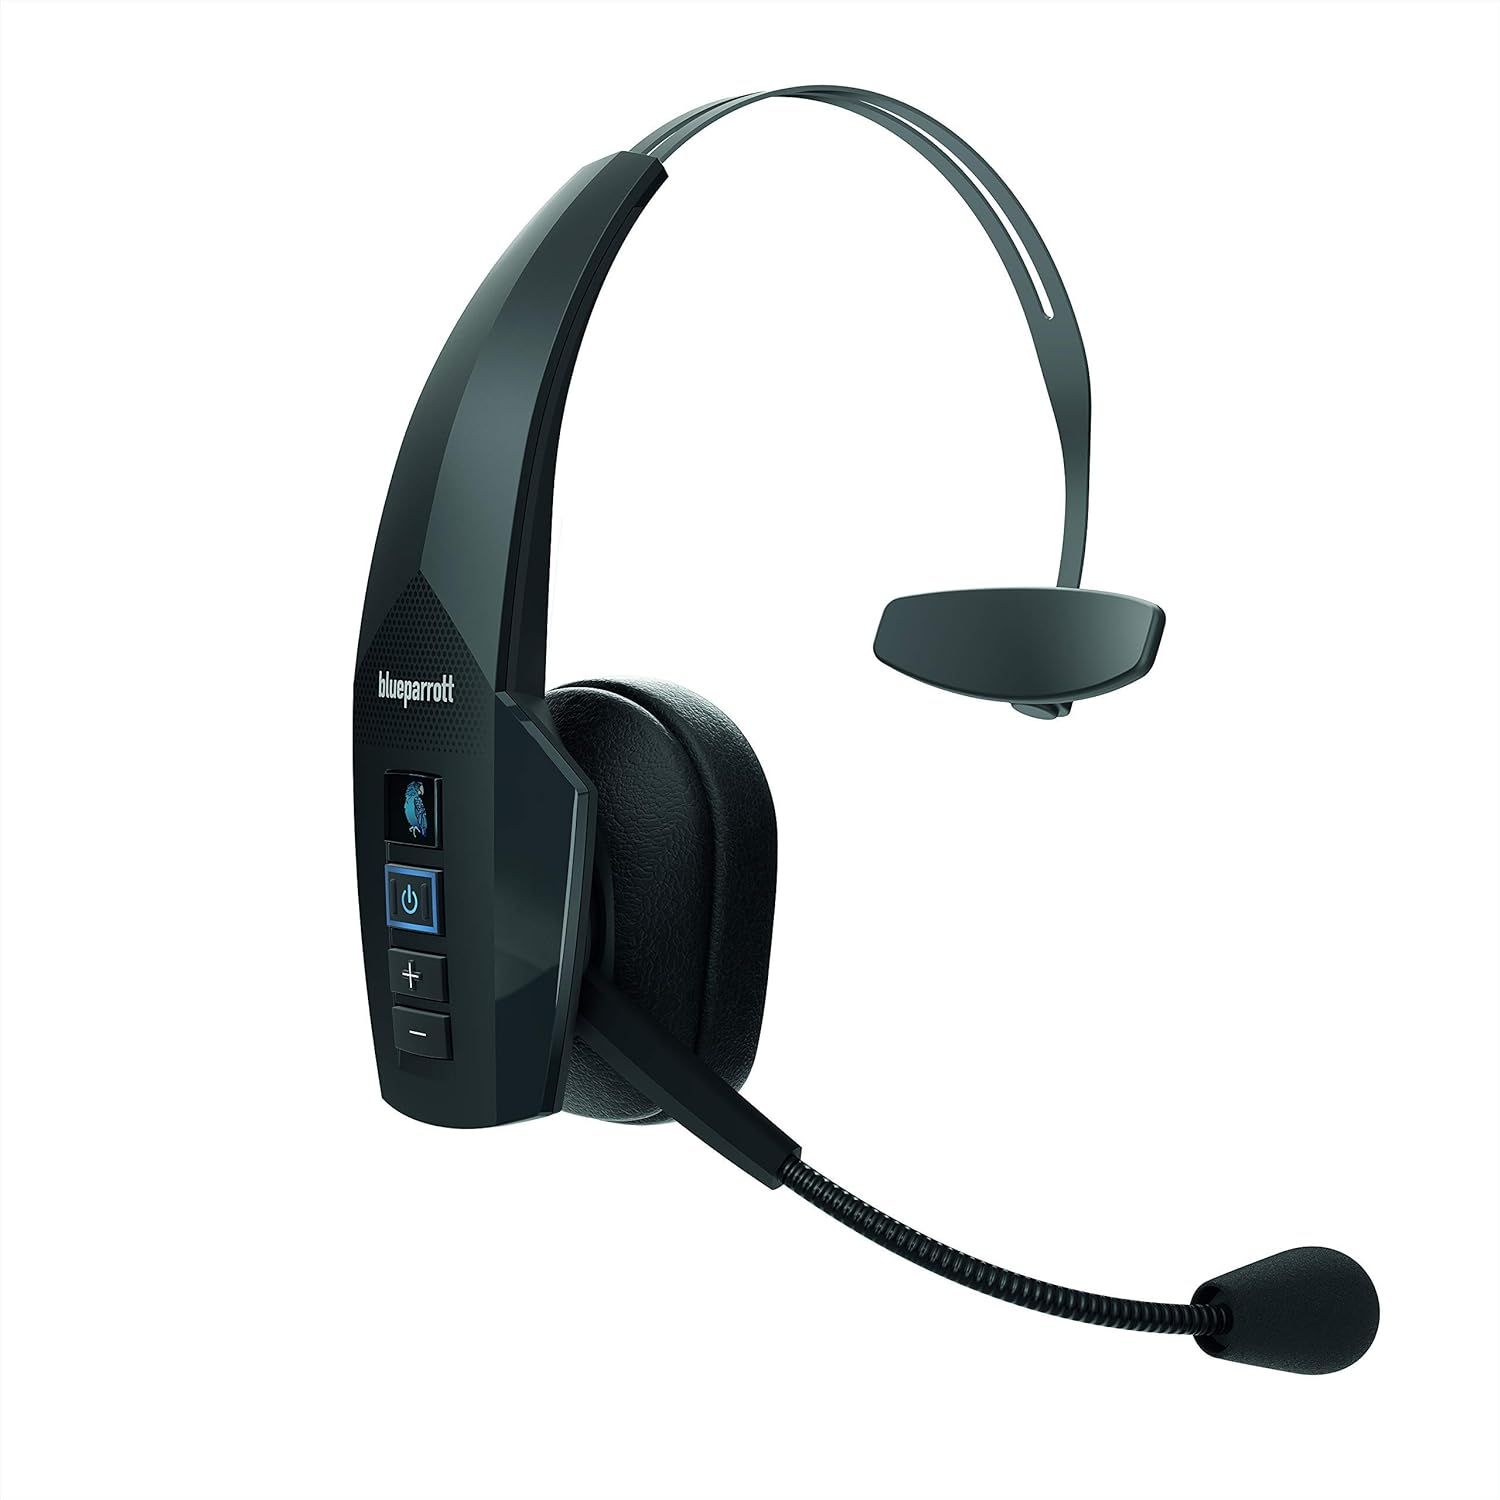 Bluetooth Mono Headsets & Earpieces - Easy hands-free calls